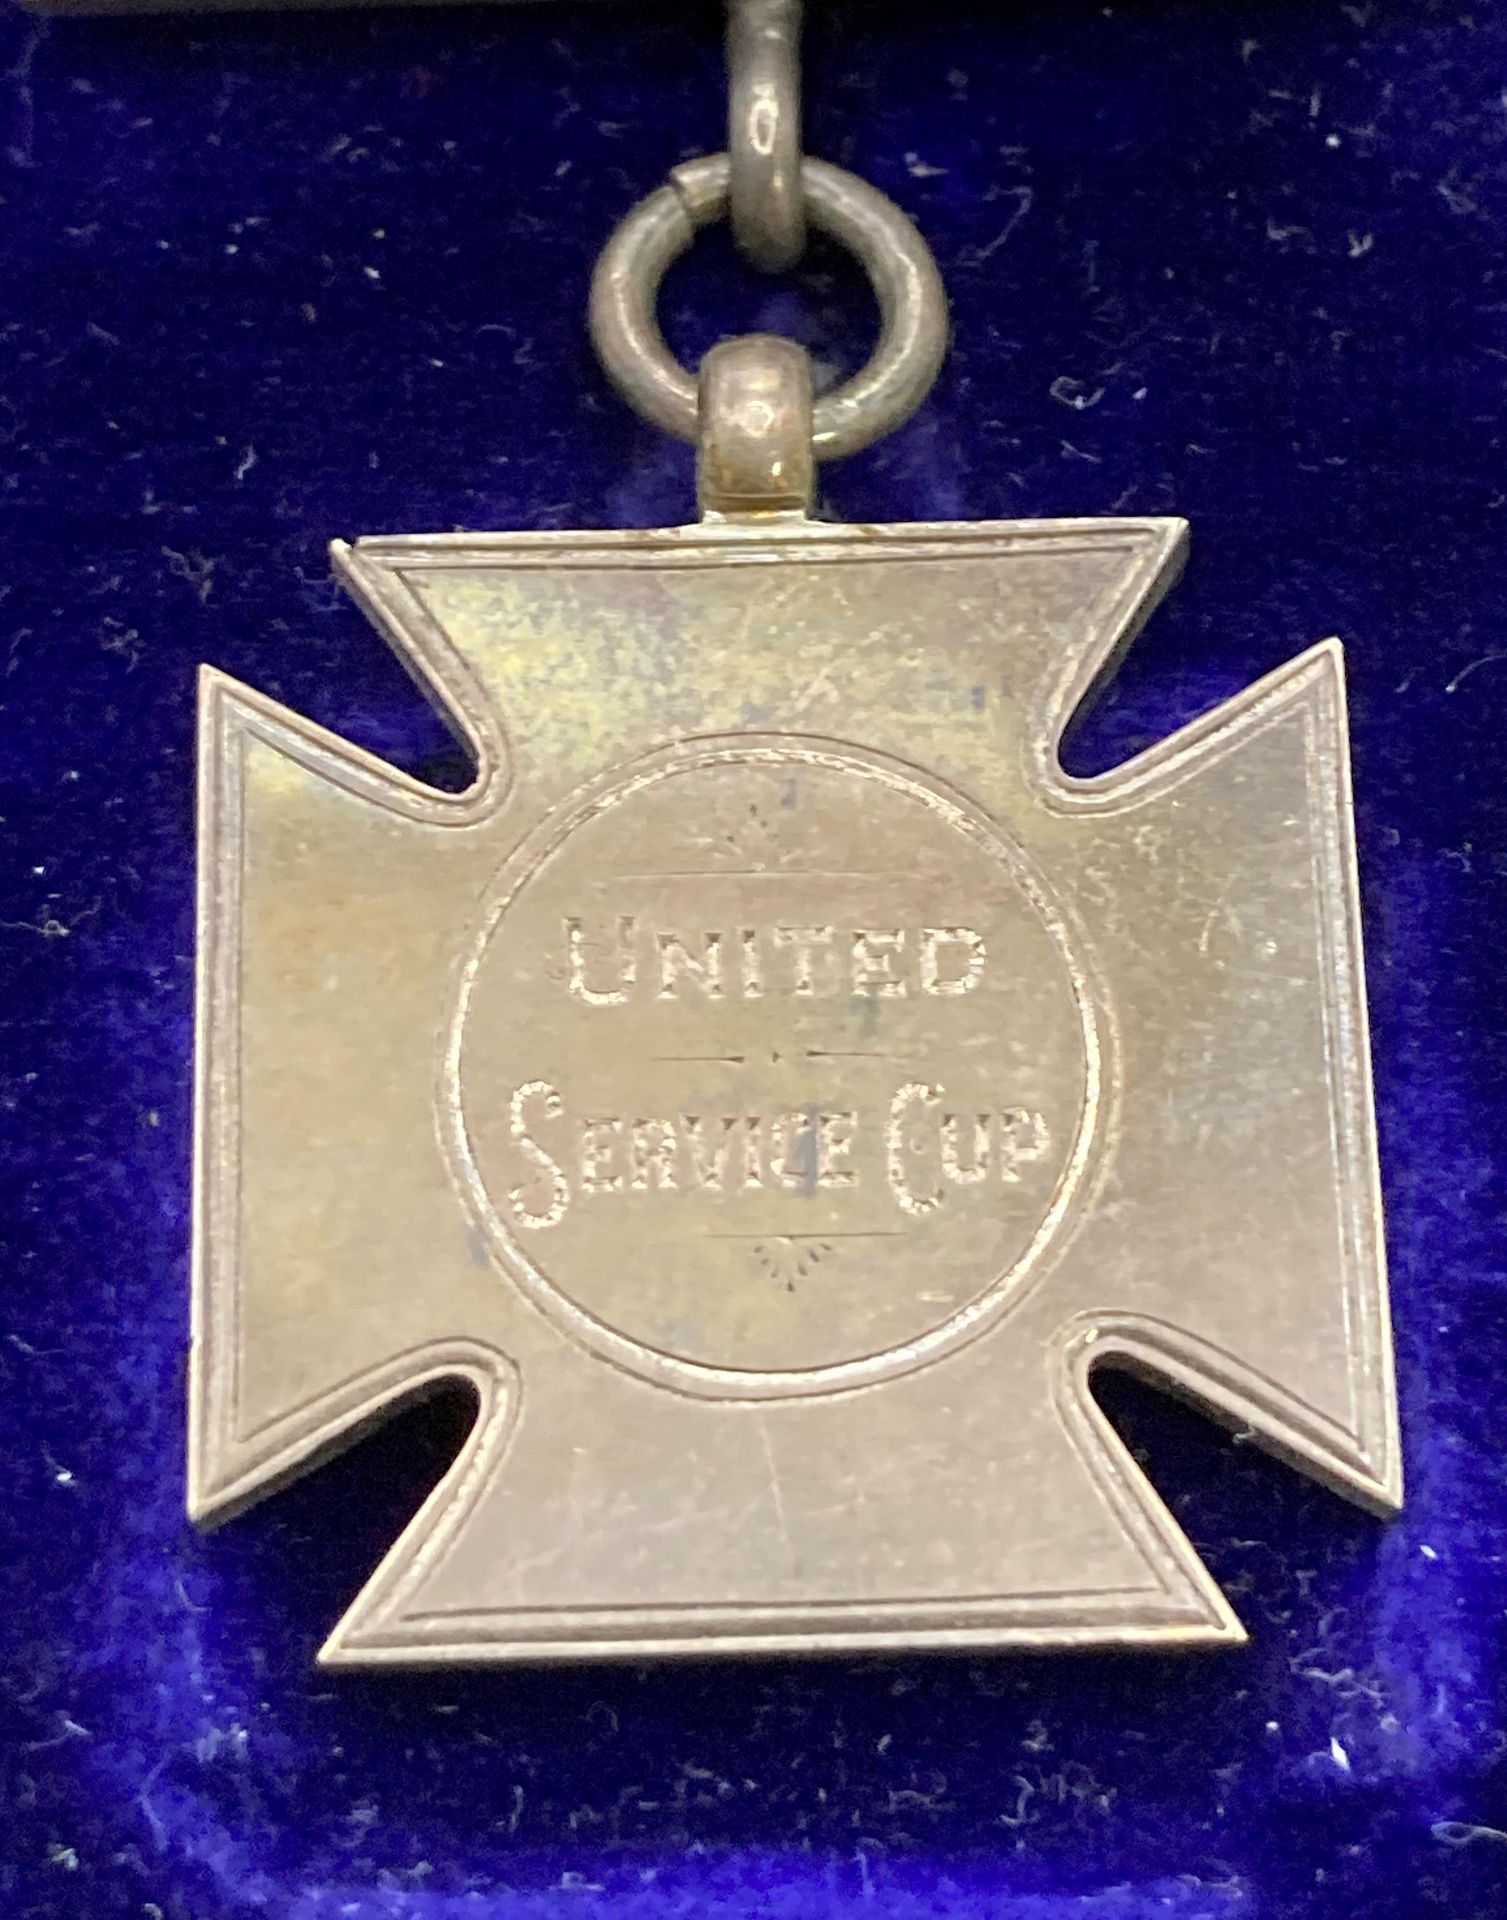 UNITED SERVICE CUP SPORTS MEDAL MALTA 1905 in silver awarded to ED. J. COOPER. P.O. 1ST. CLASS. H.M. - Image 2 of 4